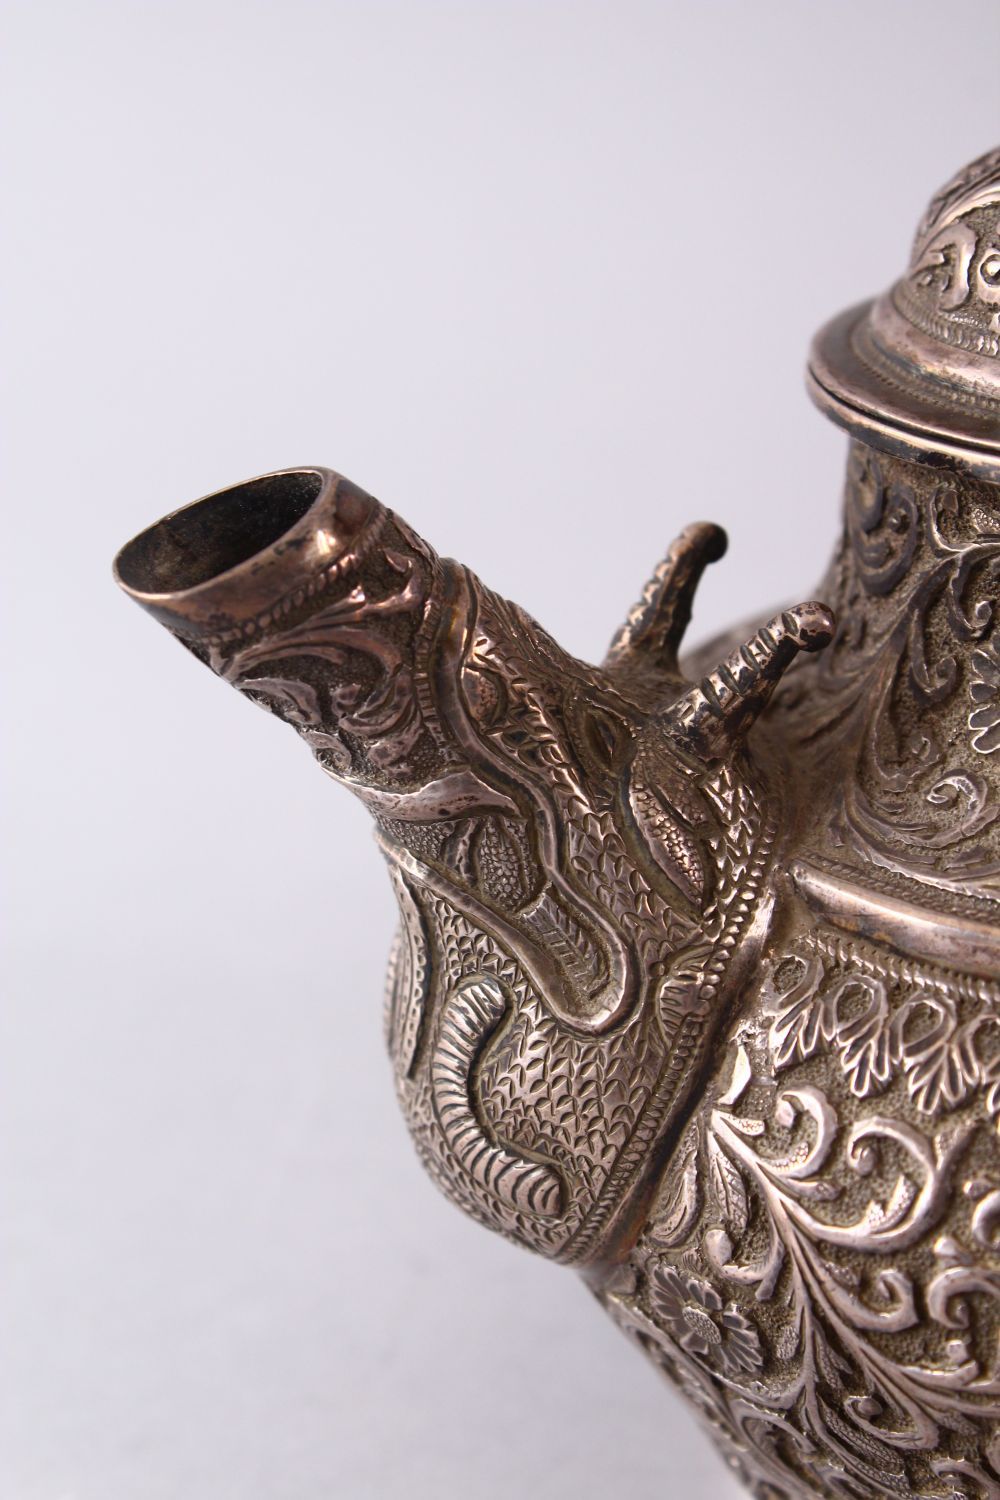 A GOOD 19TH CENTURY TURKISH SOLID SILVER TEAPOT carved with formal foliage and a dog style handle, - Image 6 of 10